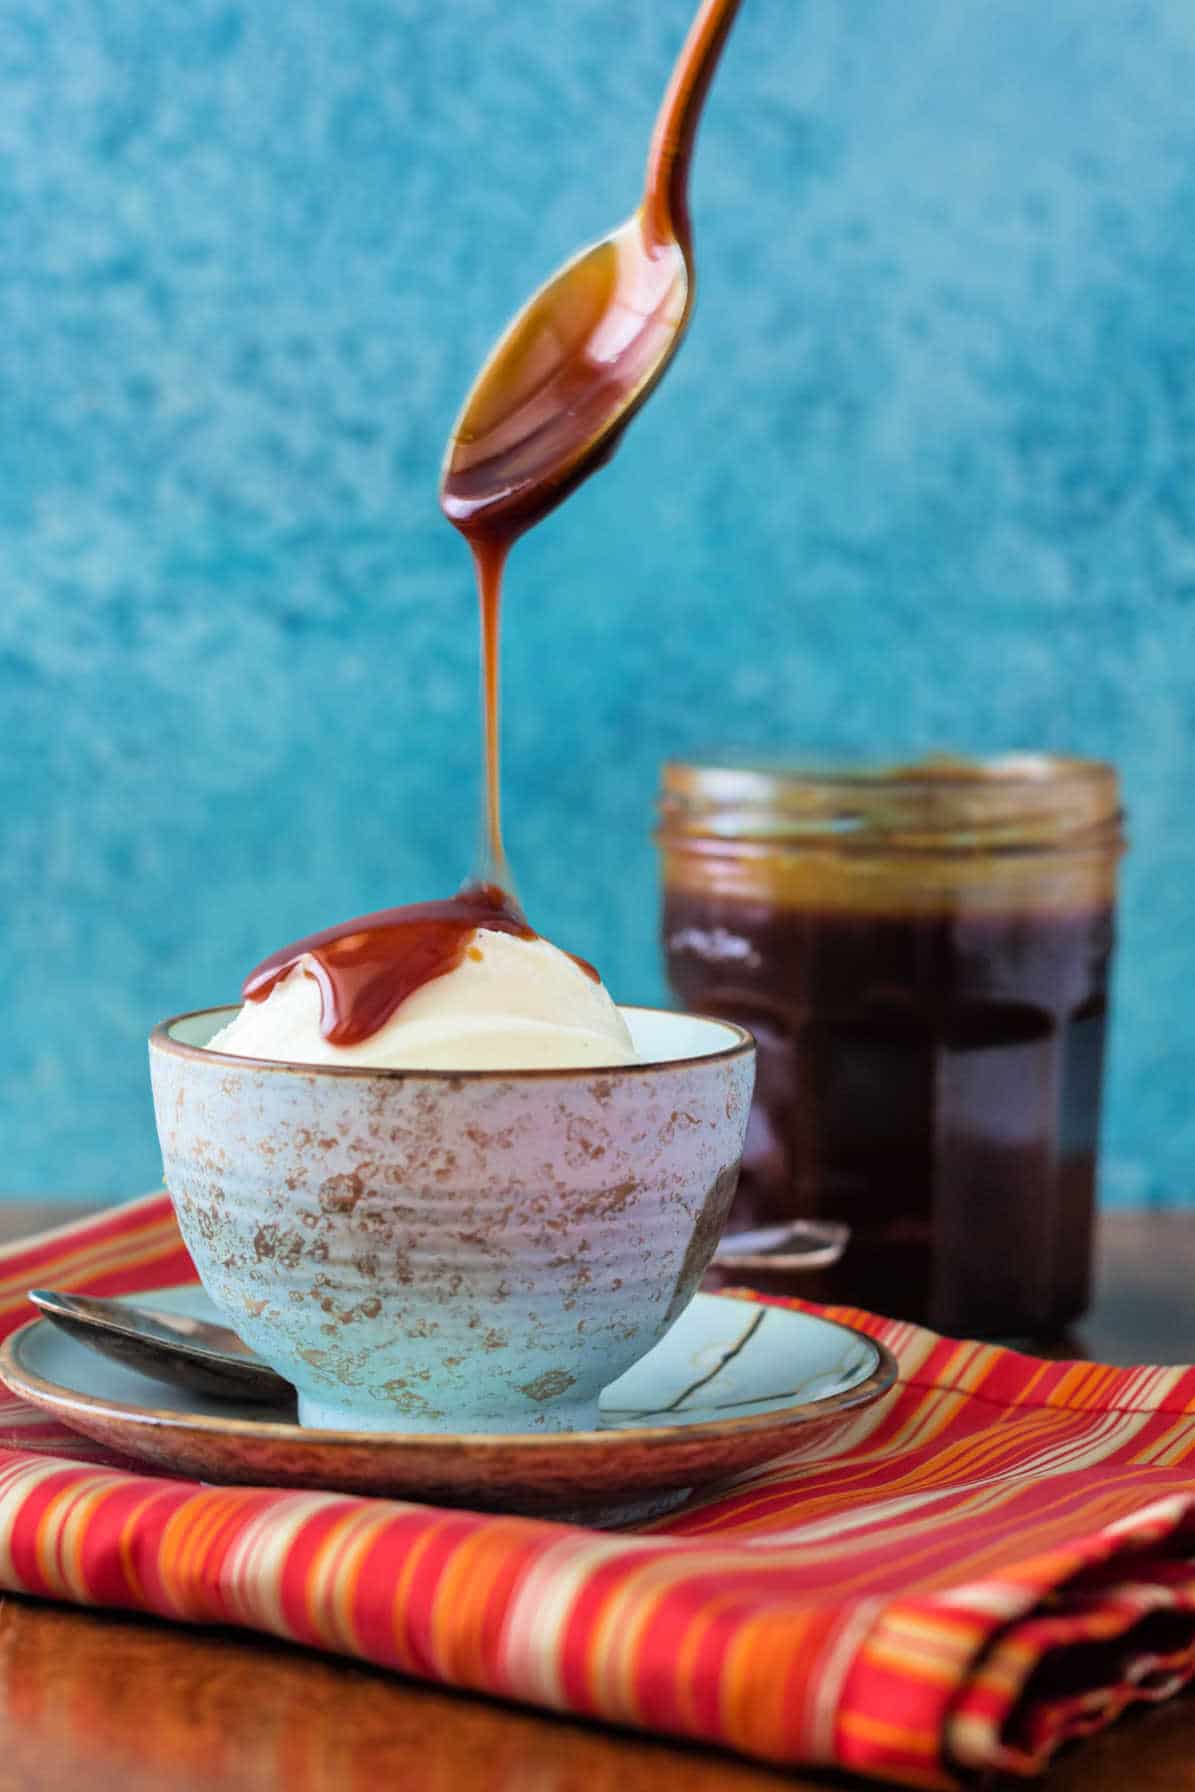 A spoon drizzling caramel sauce over ice cream. The jar of caramel sauce is in the background.